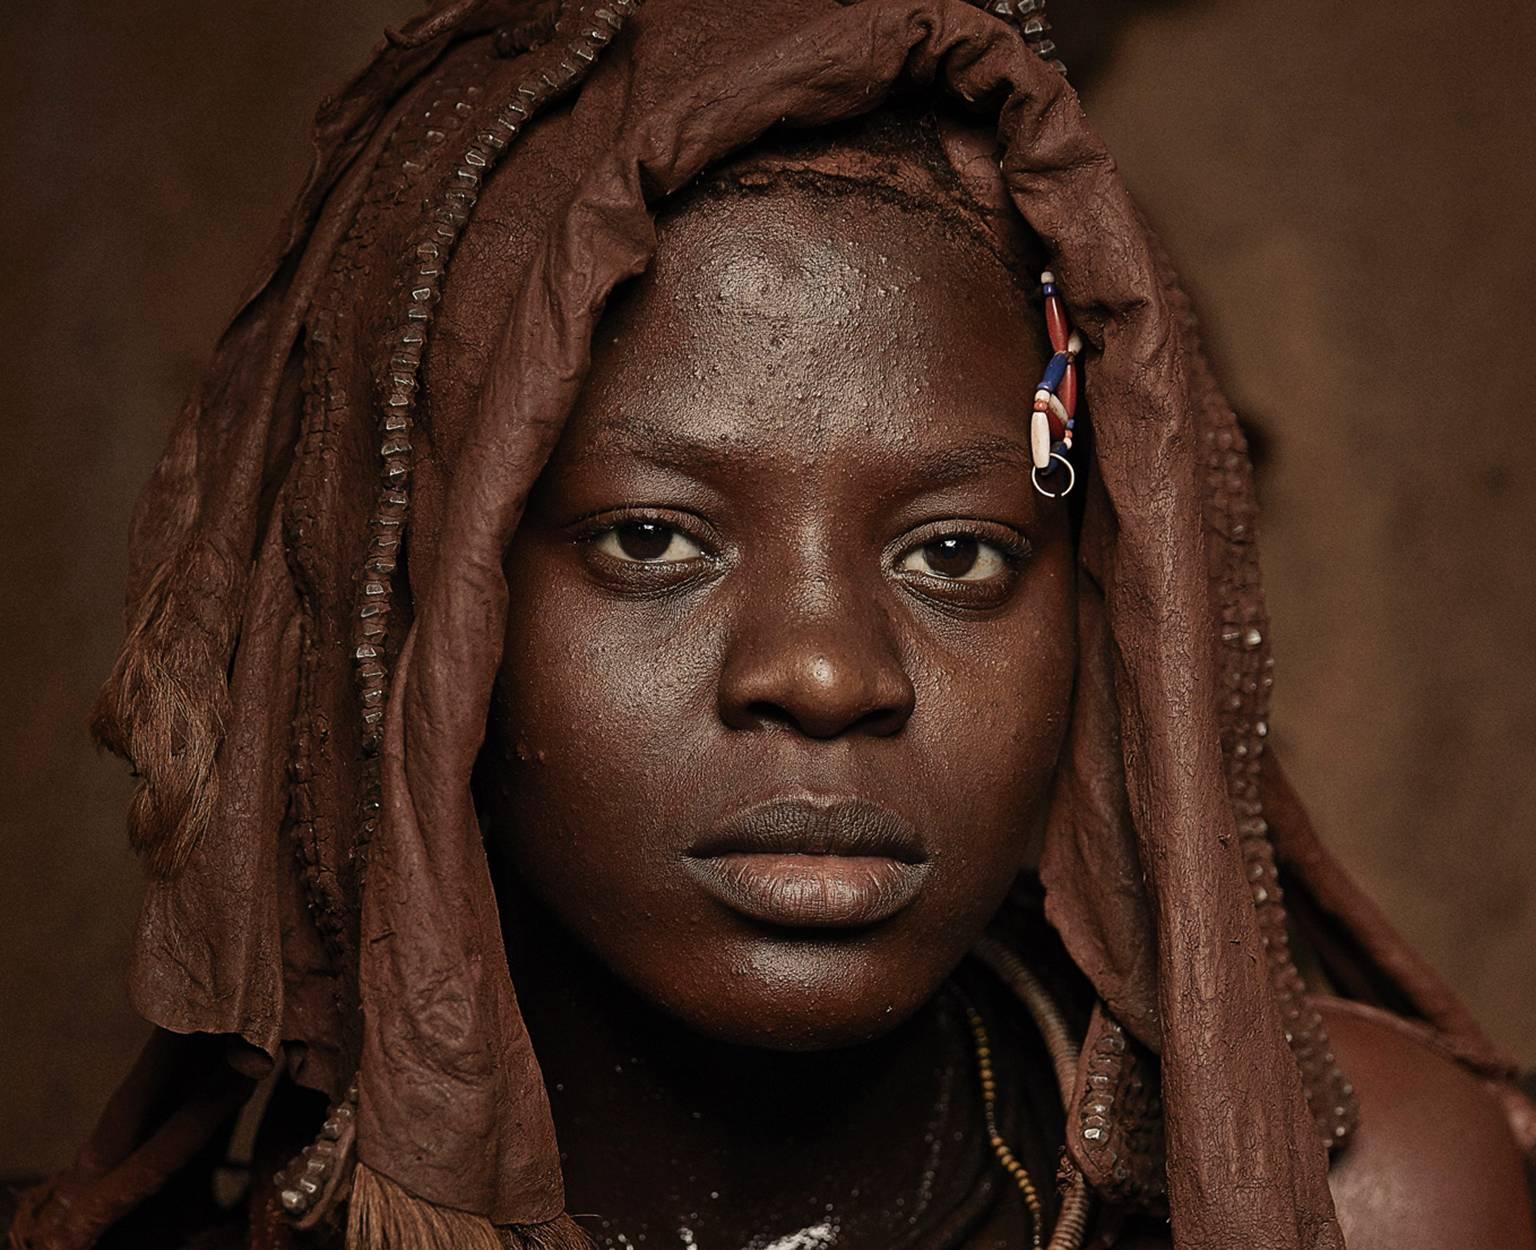 Chris Gordaneer, “Himba Woman Epupa Falls 2” Namibia 2016
Chromogenic C Print, 30 x 20”, Edition of 7.
Signed, Dated and Numbered on the Reverse.

Available also in Color. Please see Details.